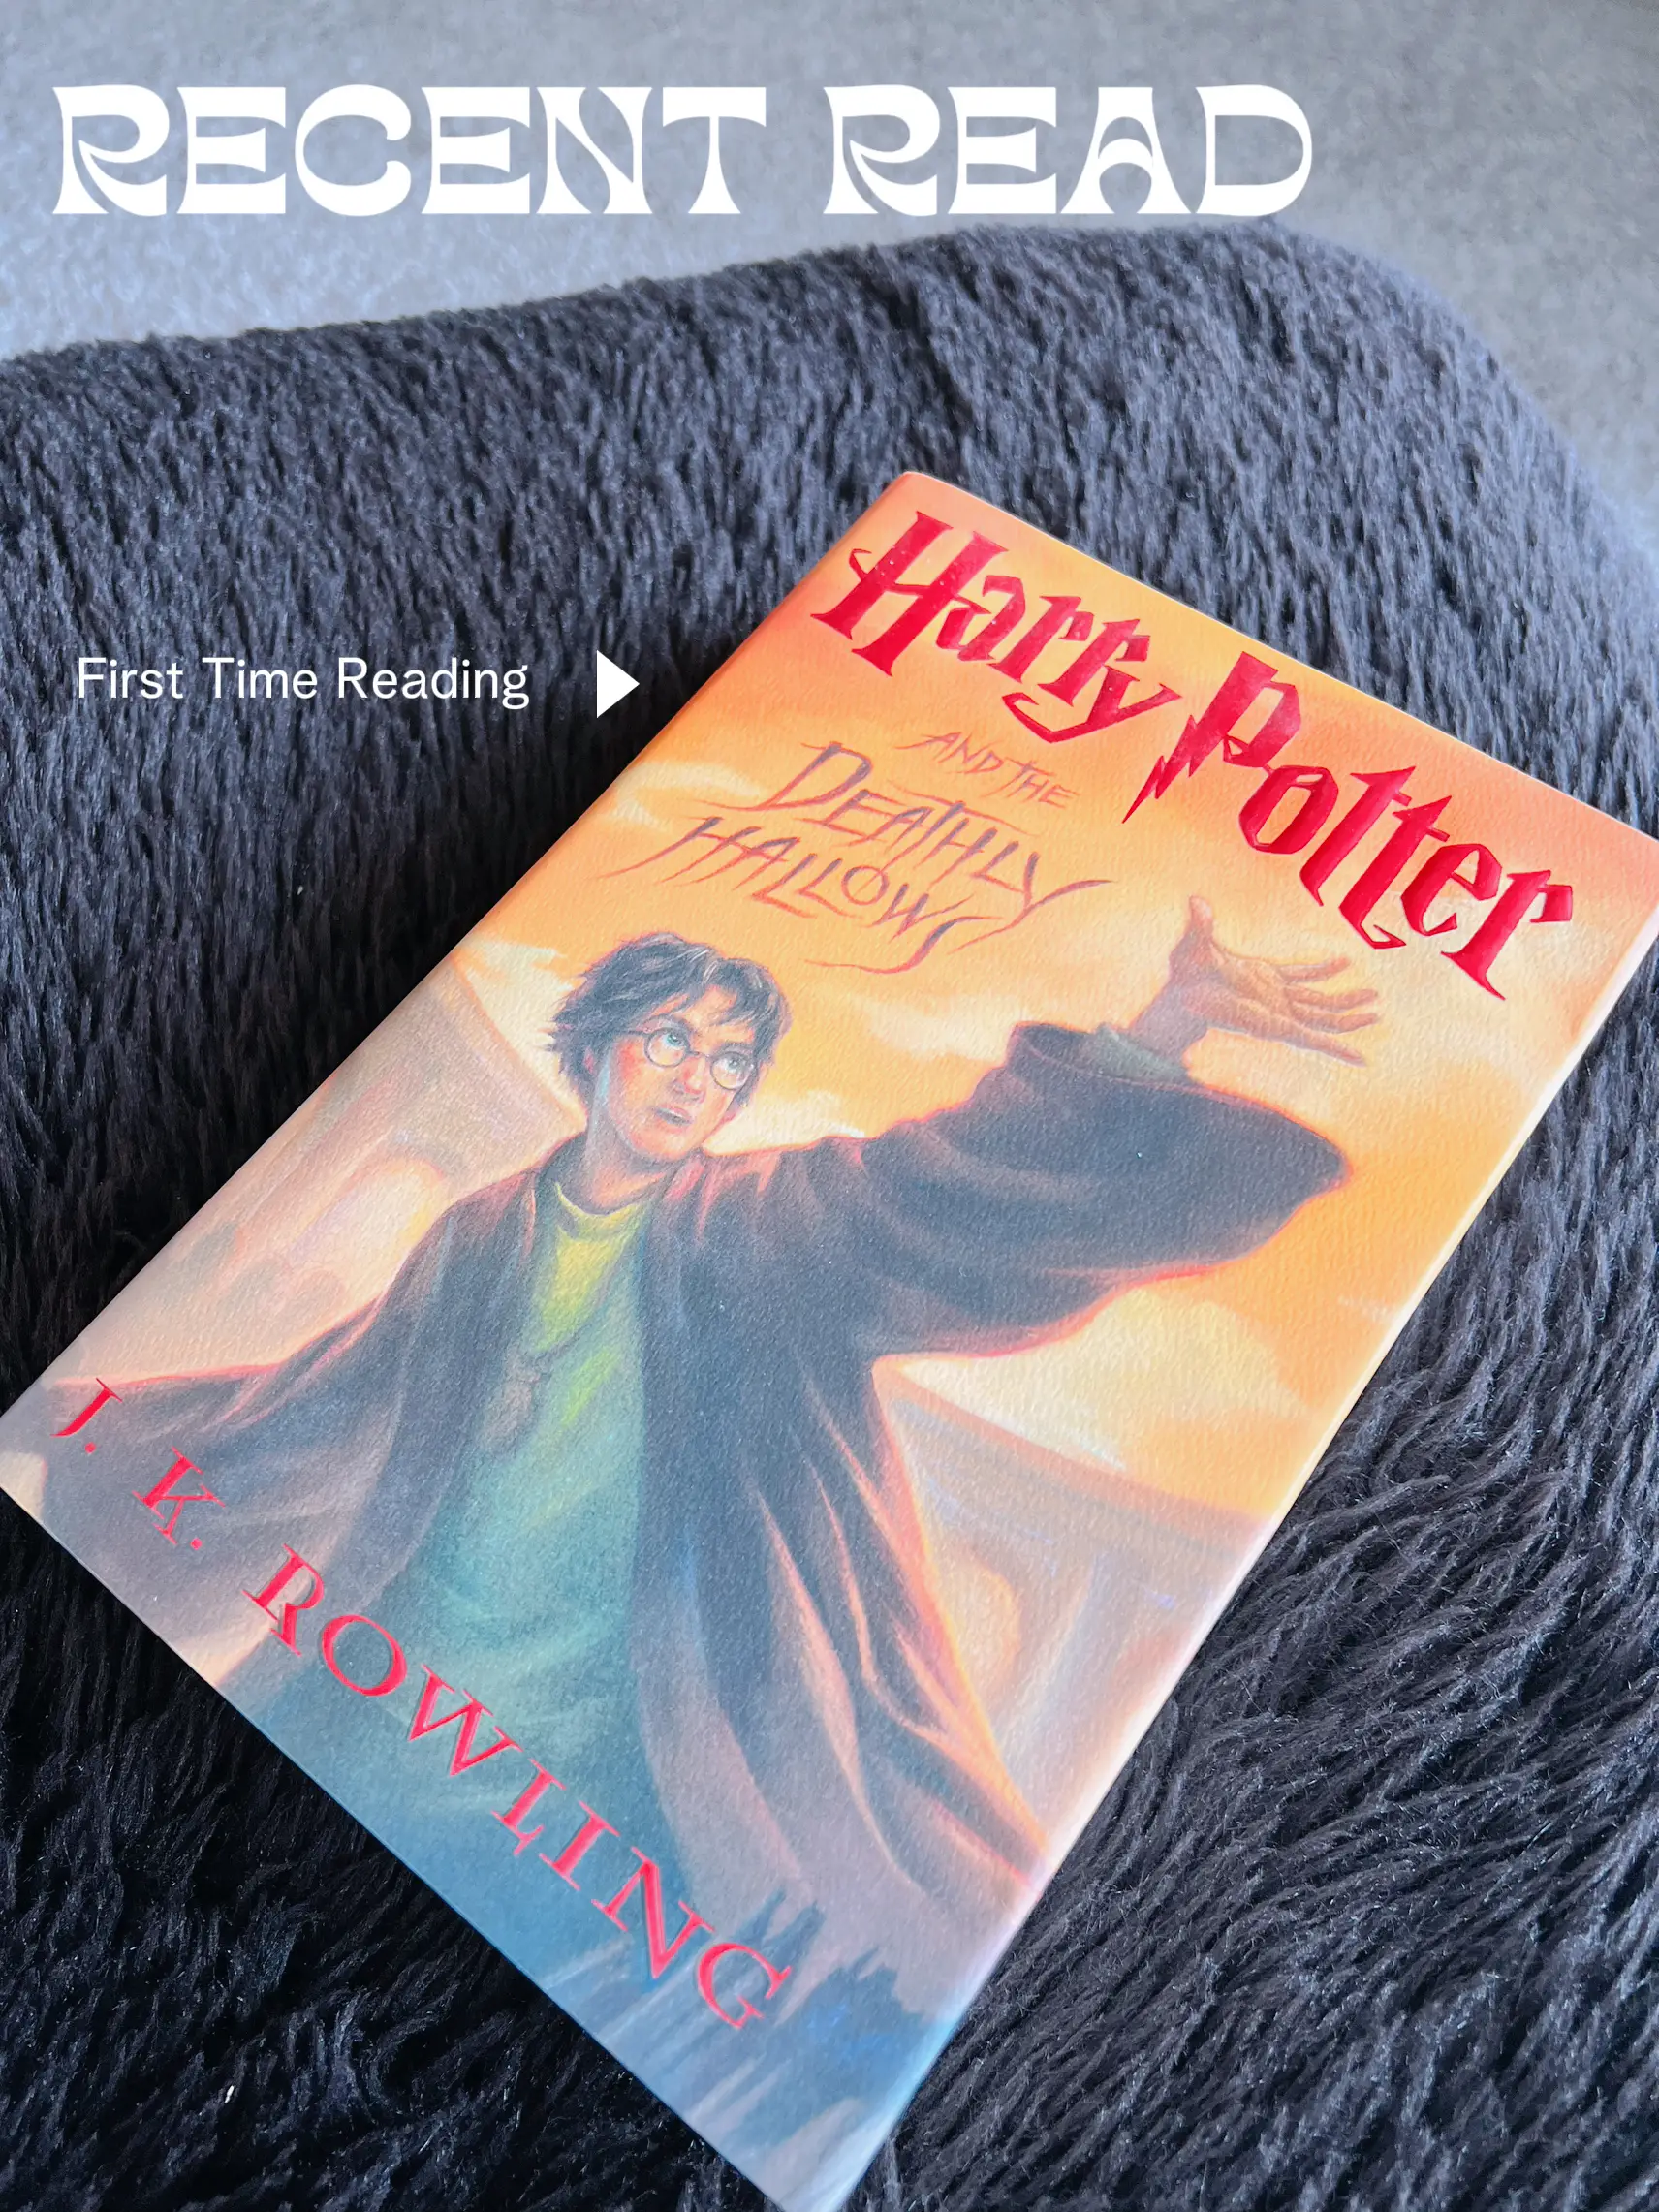 What is your favorite Harry Potter game? : r/harrypotter